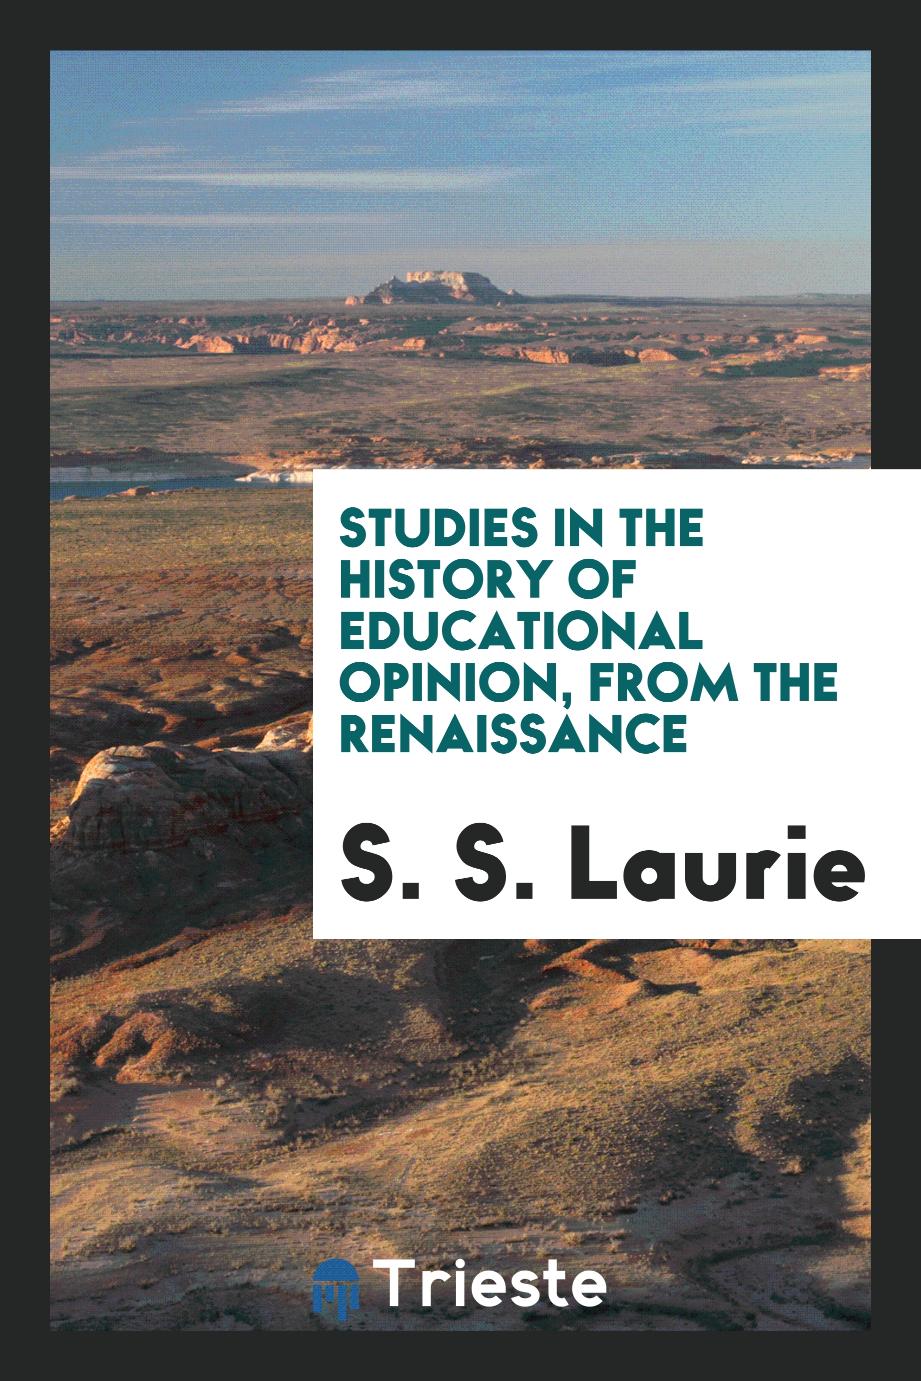 Studies in the history of educational opinion, from the Renaissance